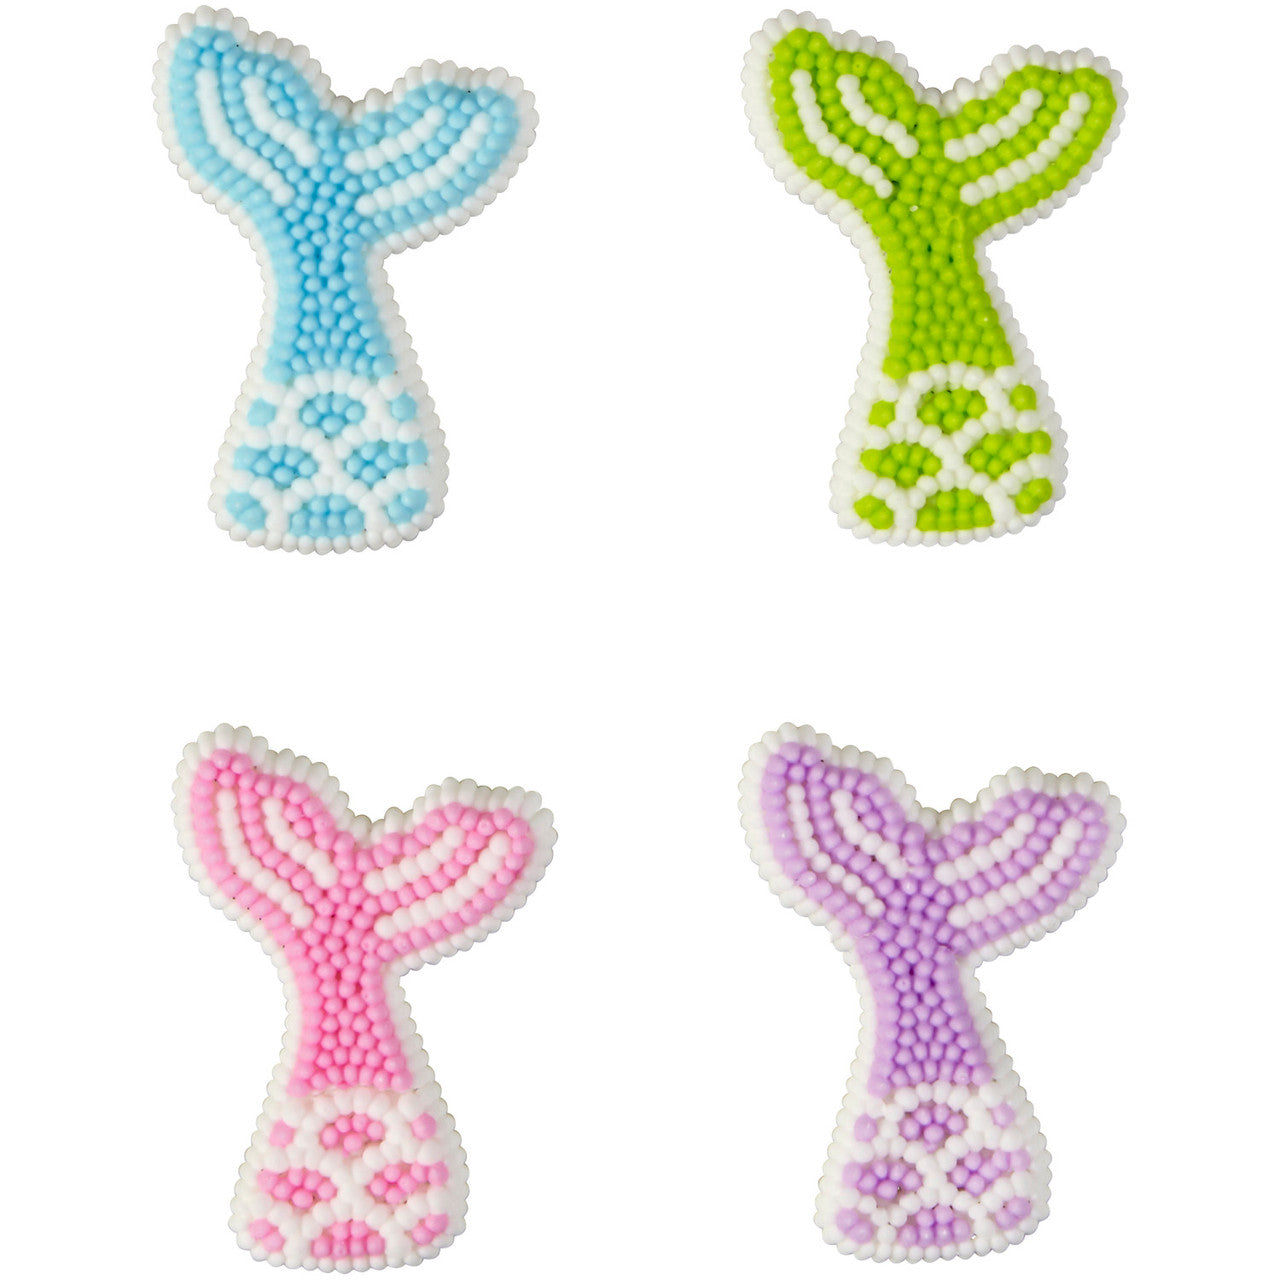 Mermaid Tail Icing Decorations, 8 Pieces